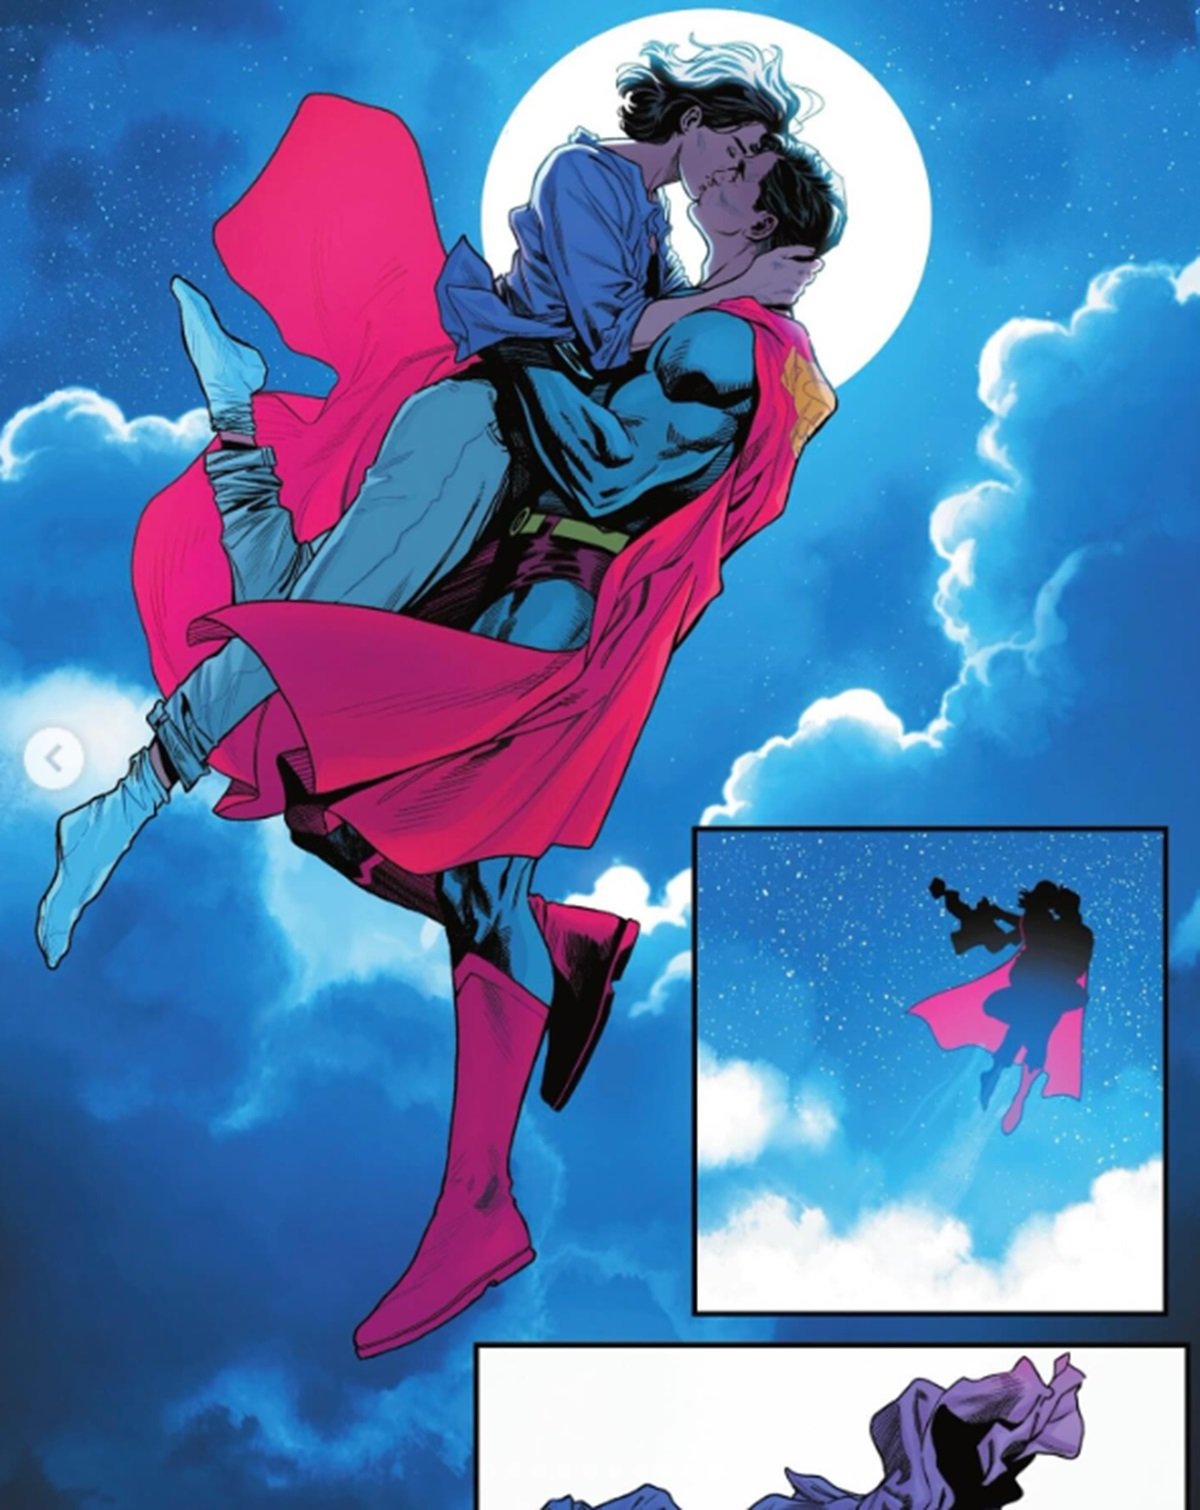 Superman and Lois share a kiss in the sky in Action Comics #1035 with art by Daniel Sampere.